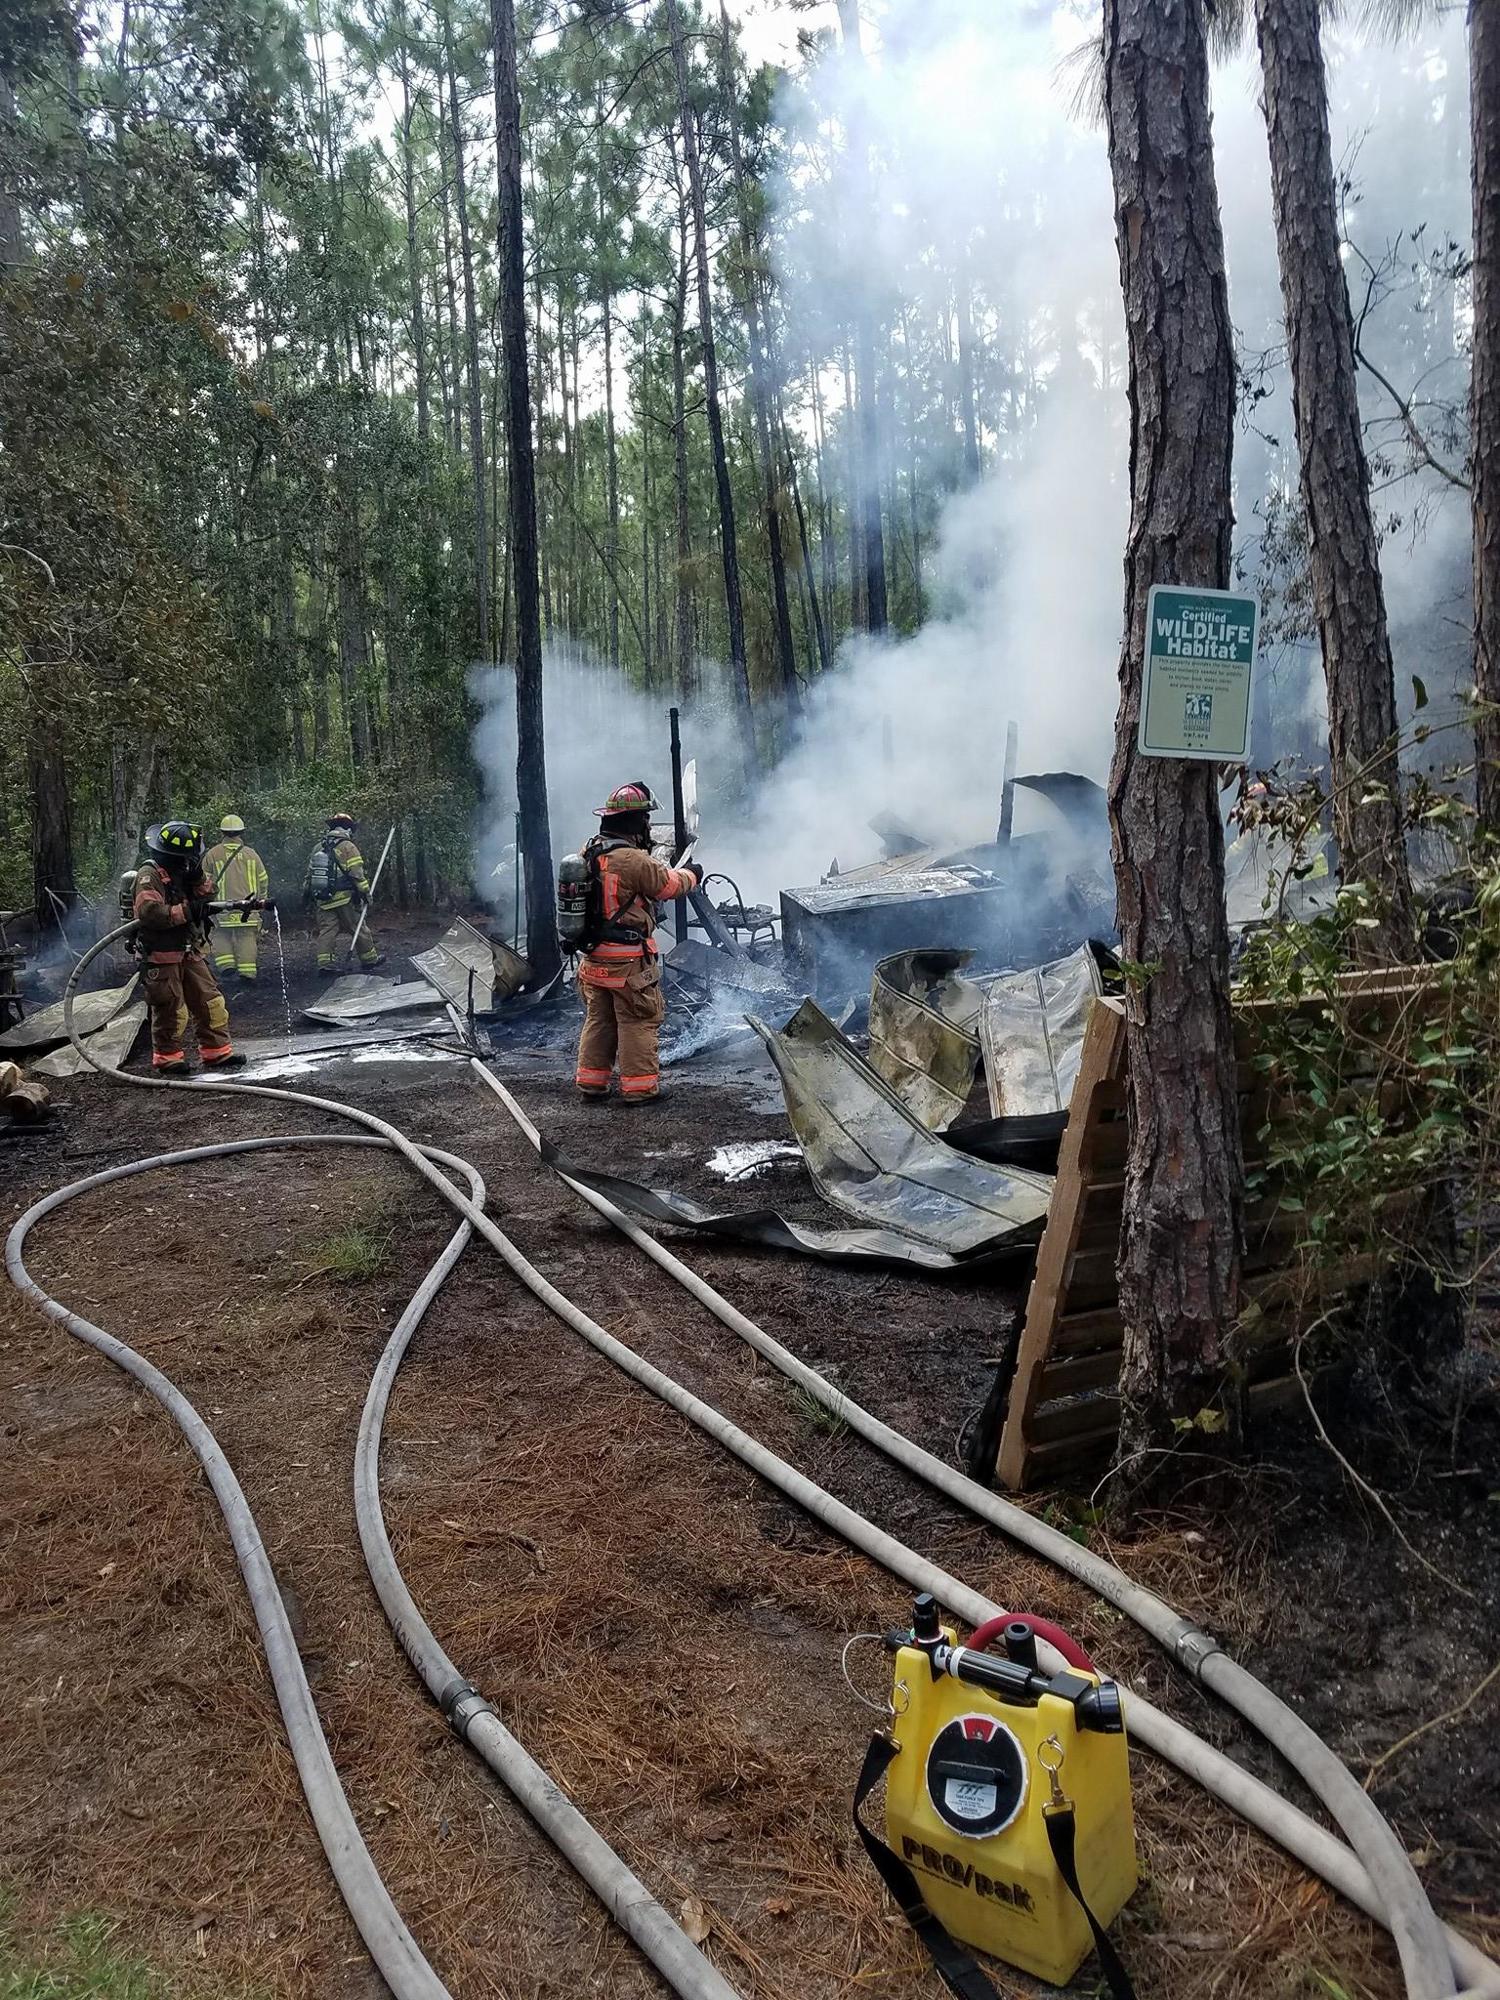 Crews put out flames during the Thursday, Aug. 31 fire. Photo courtesy of the  The Volusia County Professional Firefighters Association